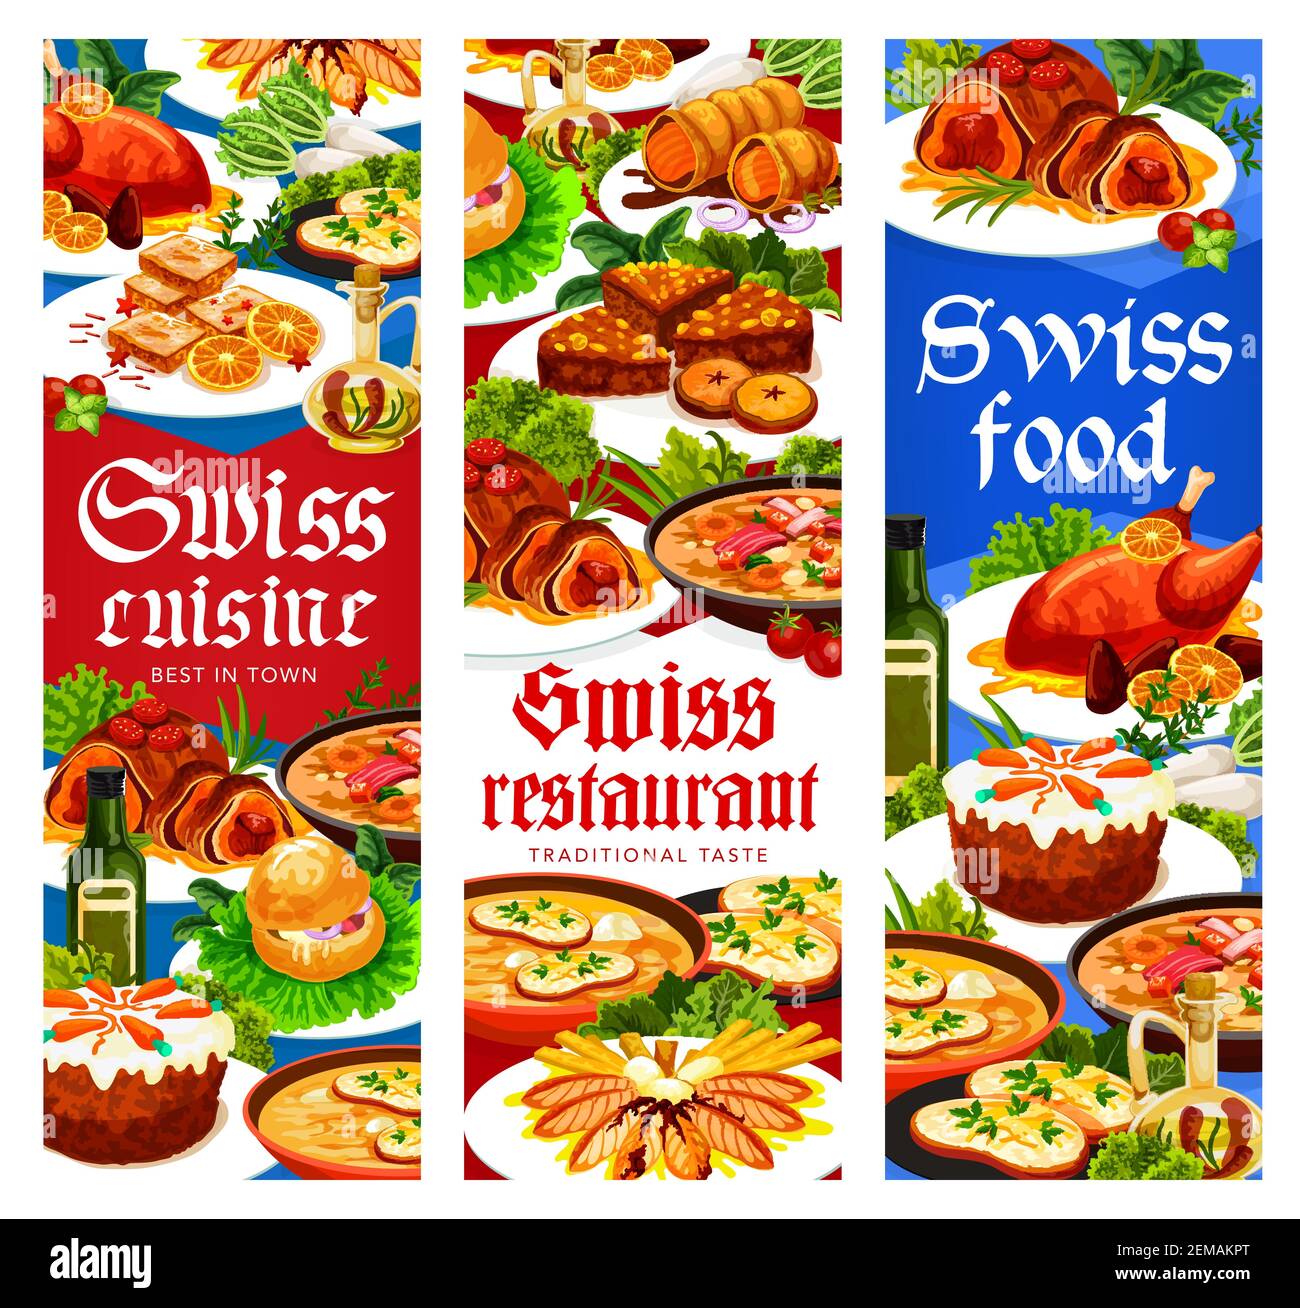 Swiss food cuisine restaurant menu vector banners. Gingerbread leckerli, chicken in dough, duck with orange, bread and carrot cakes. Swiss pearl barle Stock Vector